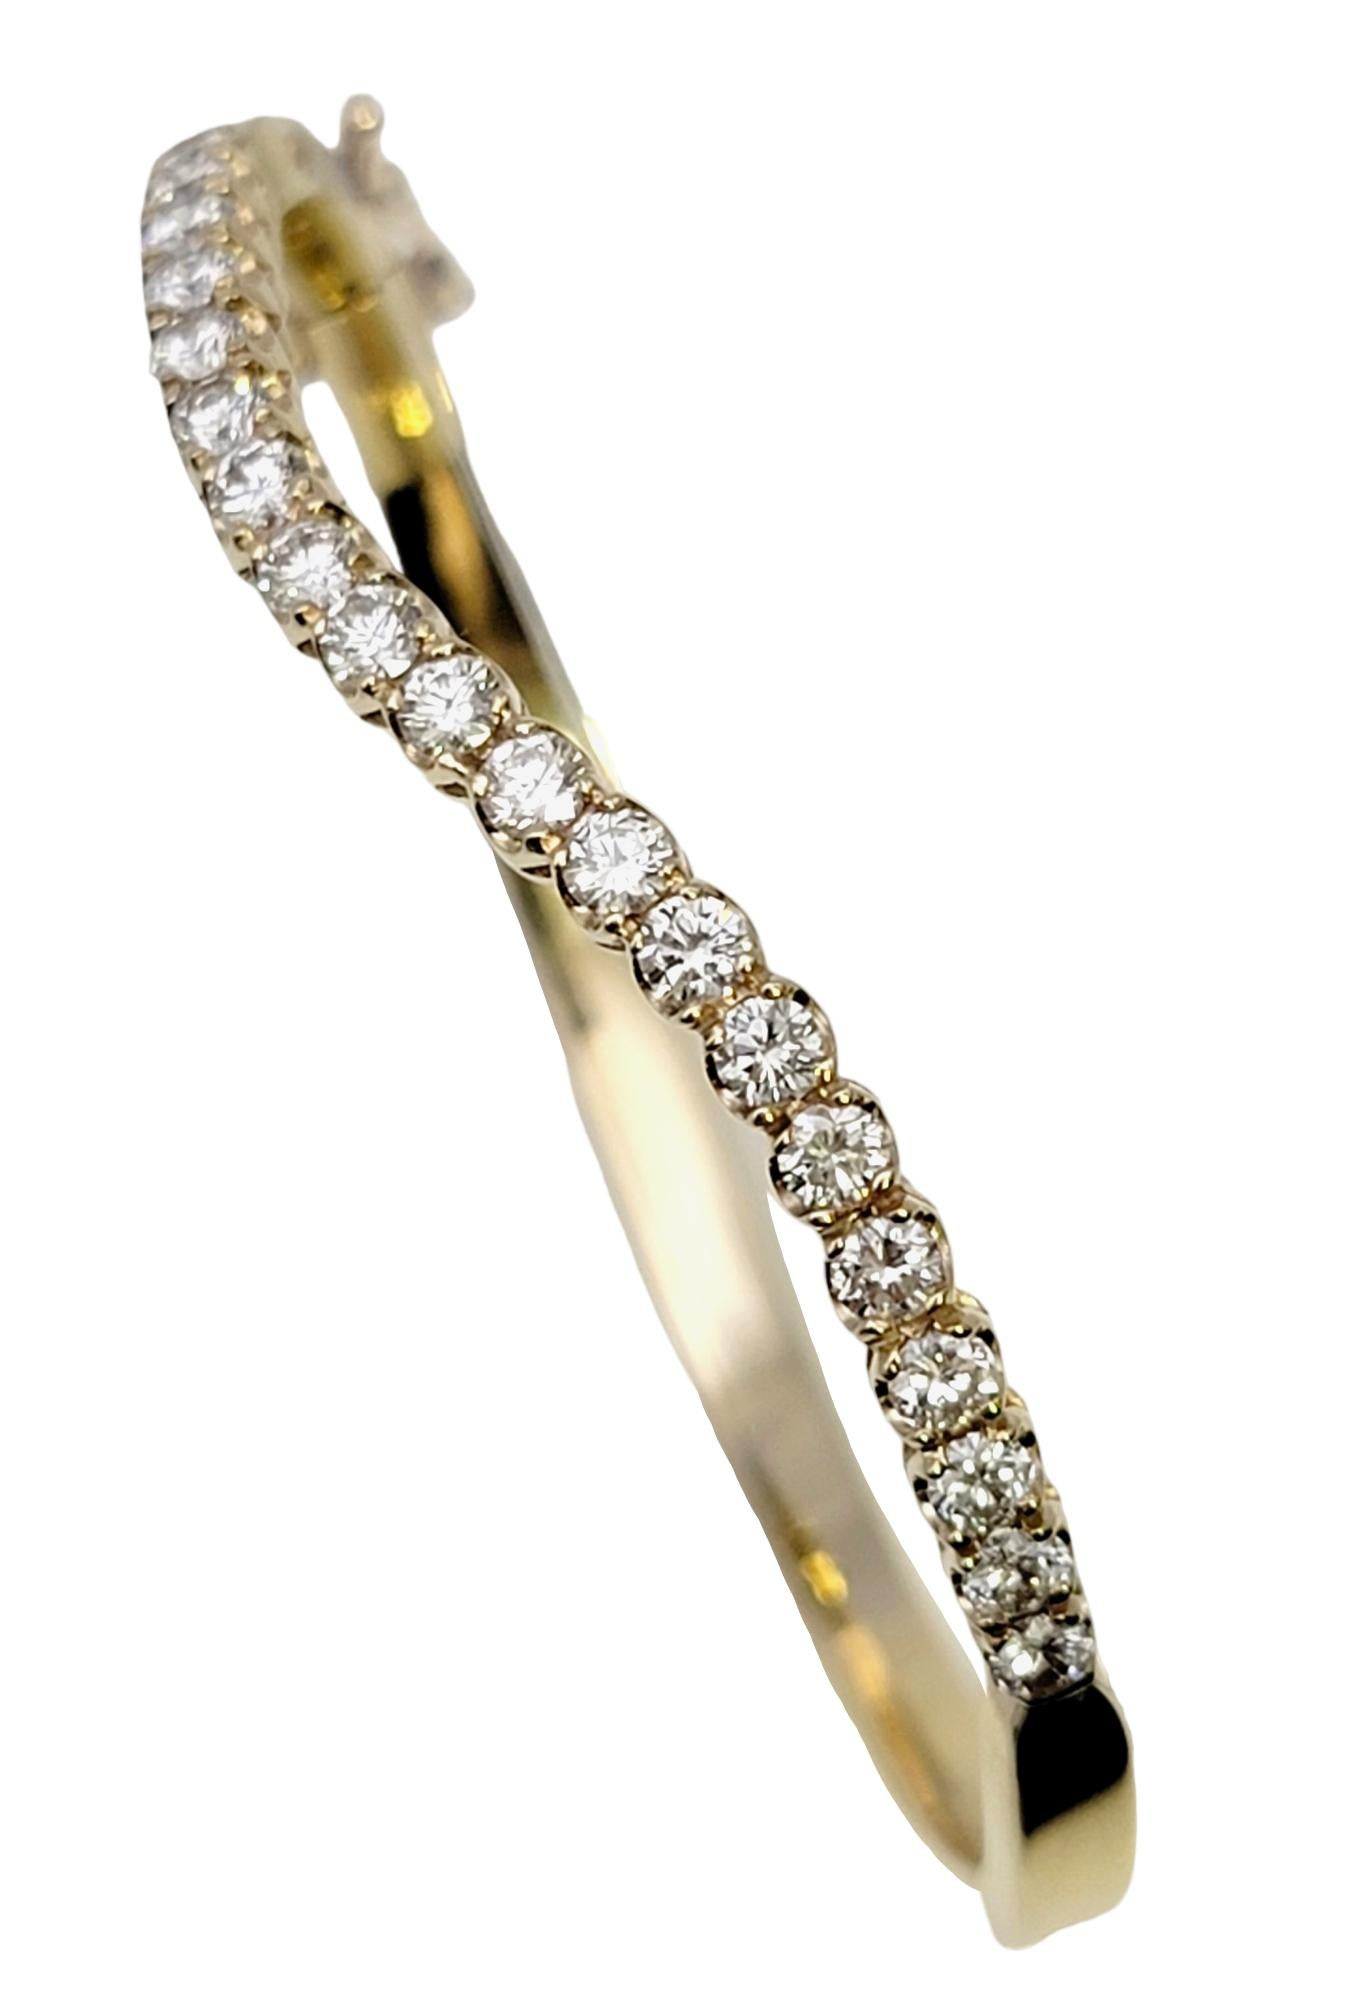 Absolutely breathtaking bangle bracelet with sleek diamond wave design. This contemporary take on the classic bangle style will adorn your wrist with elegance and give a sophisticated, fashion-forward look that you will love.   

This beautiful